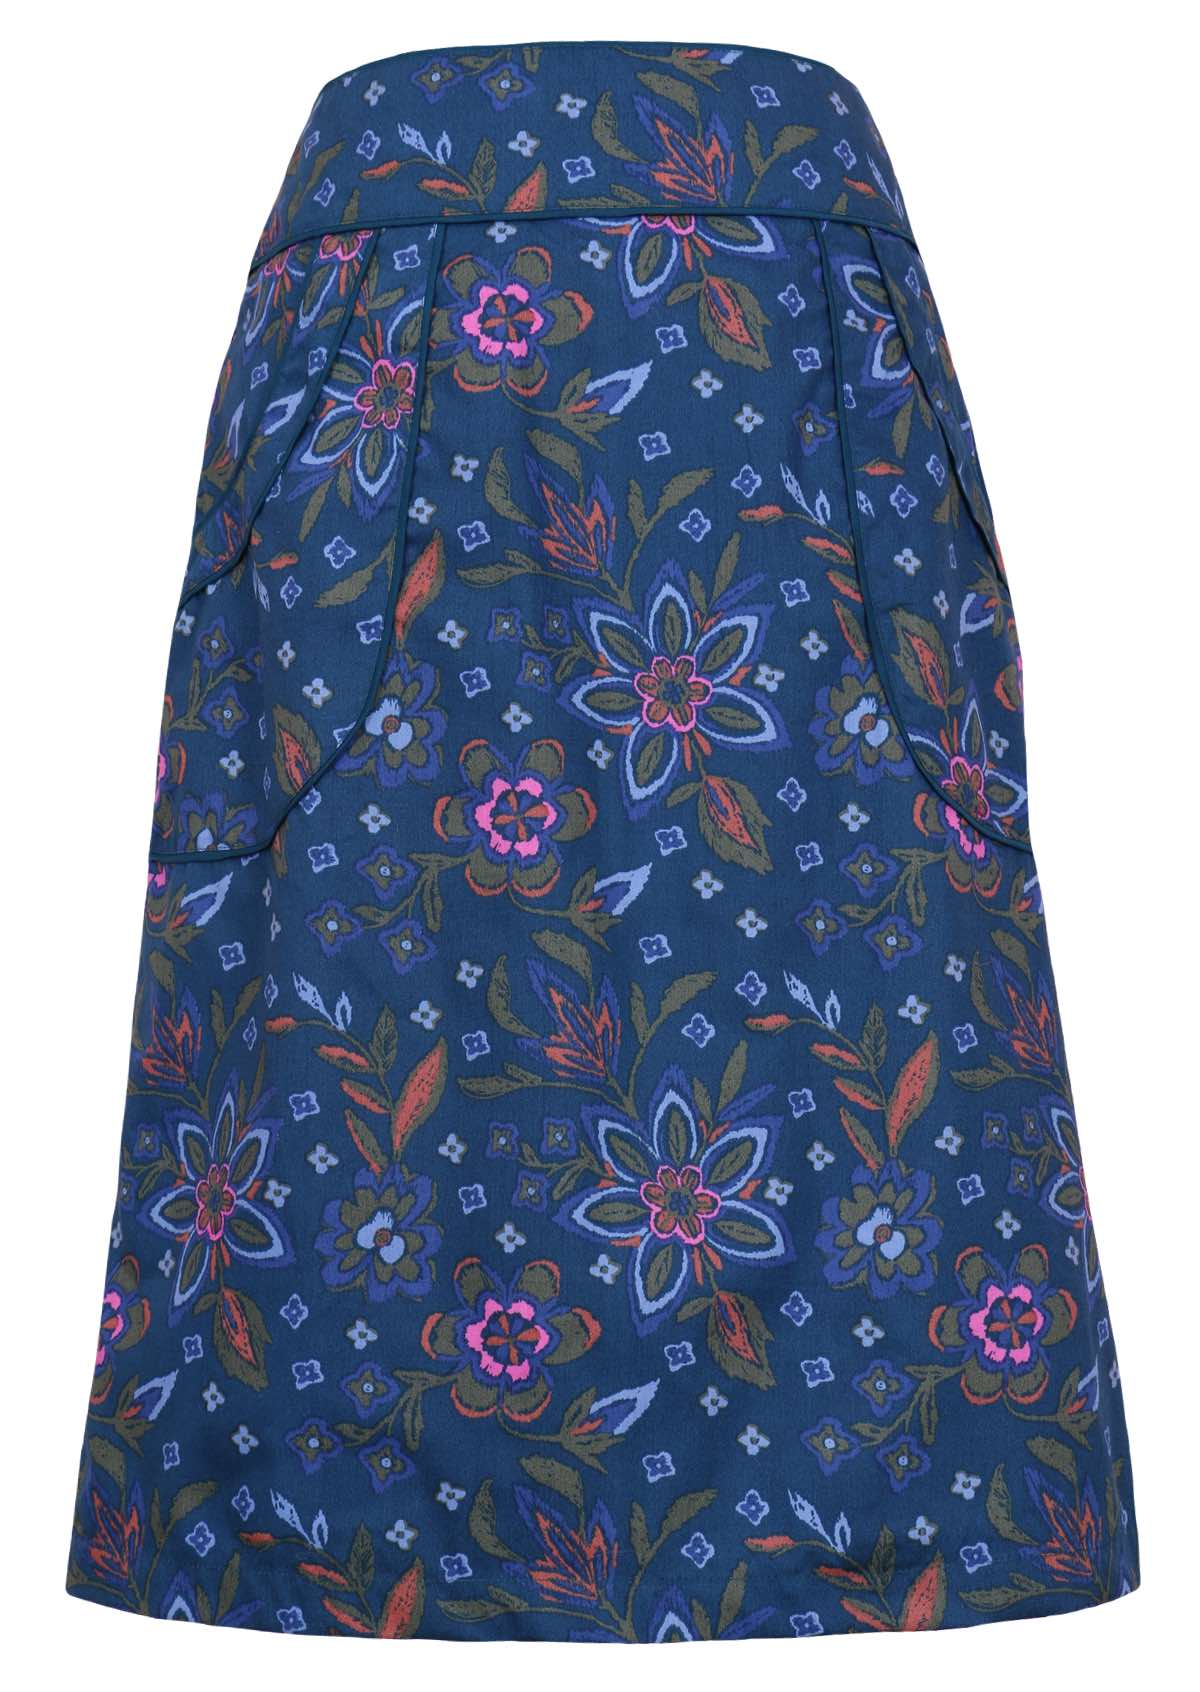 High waisted 100% cotton skirt with piped trim. 